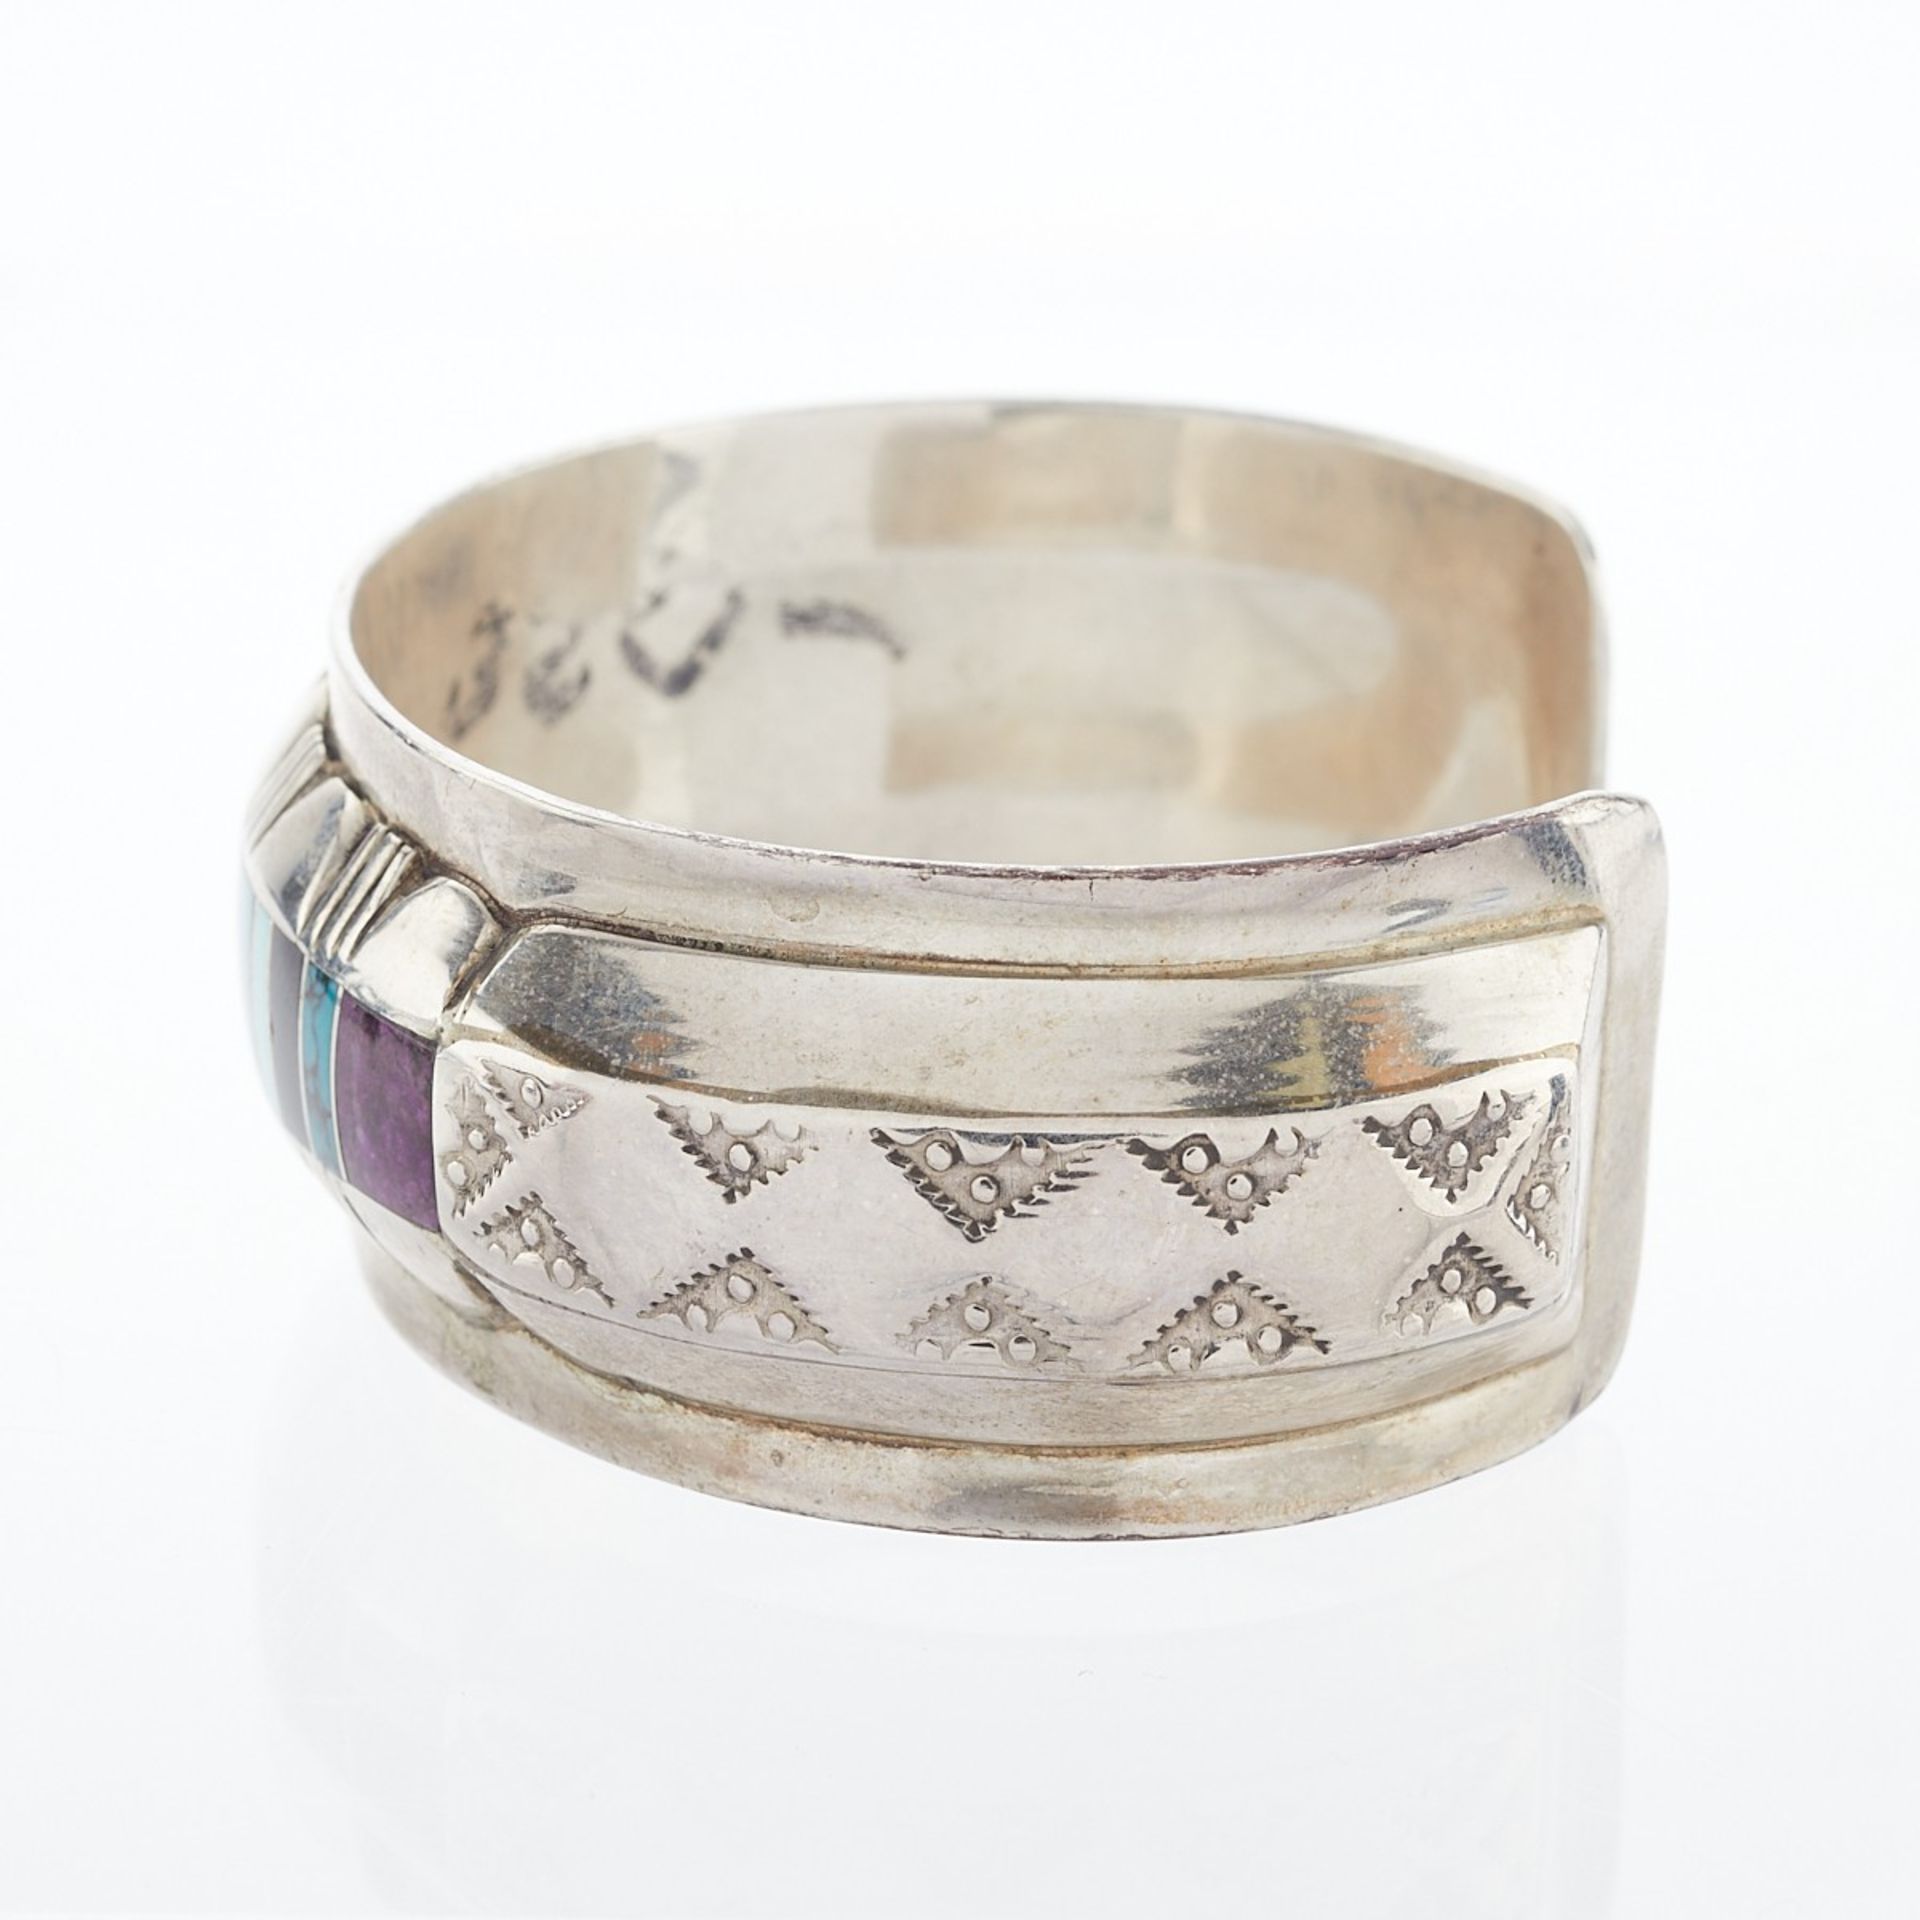 Southwest Sterling & Turquoise Cuff Bracelet - Image 3 of 9